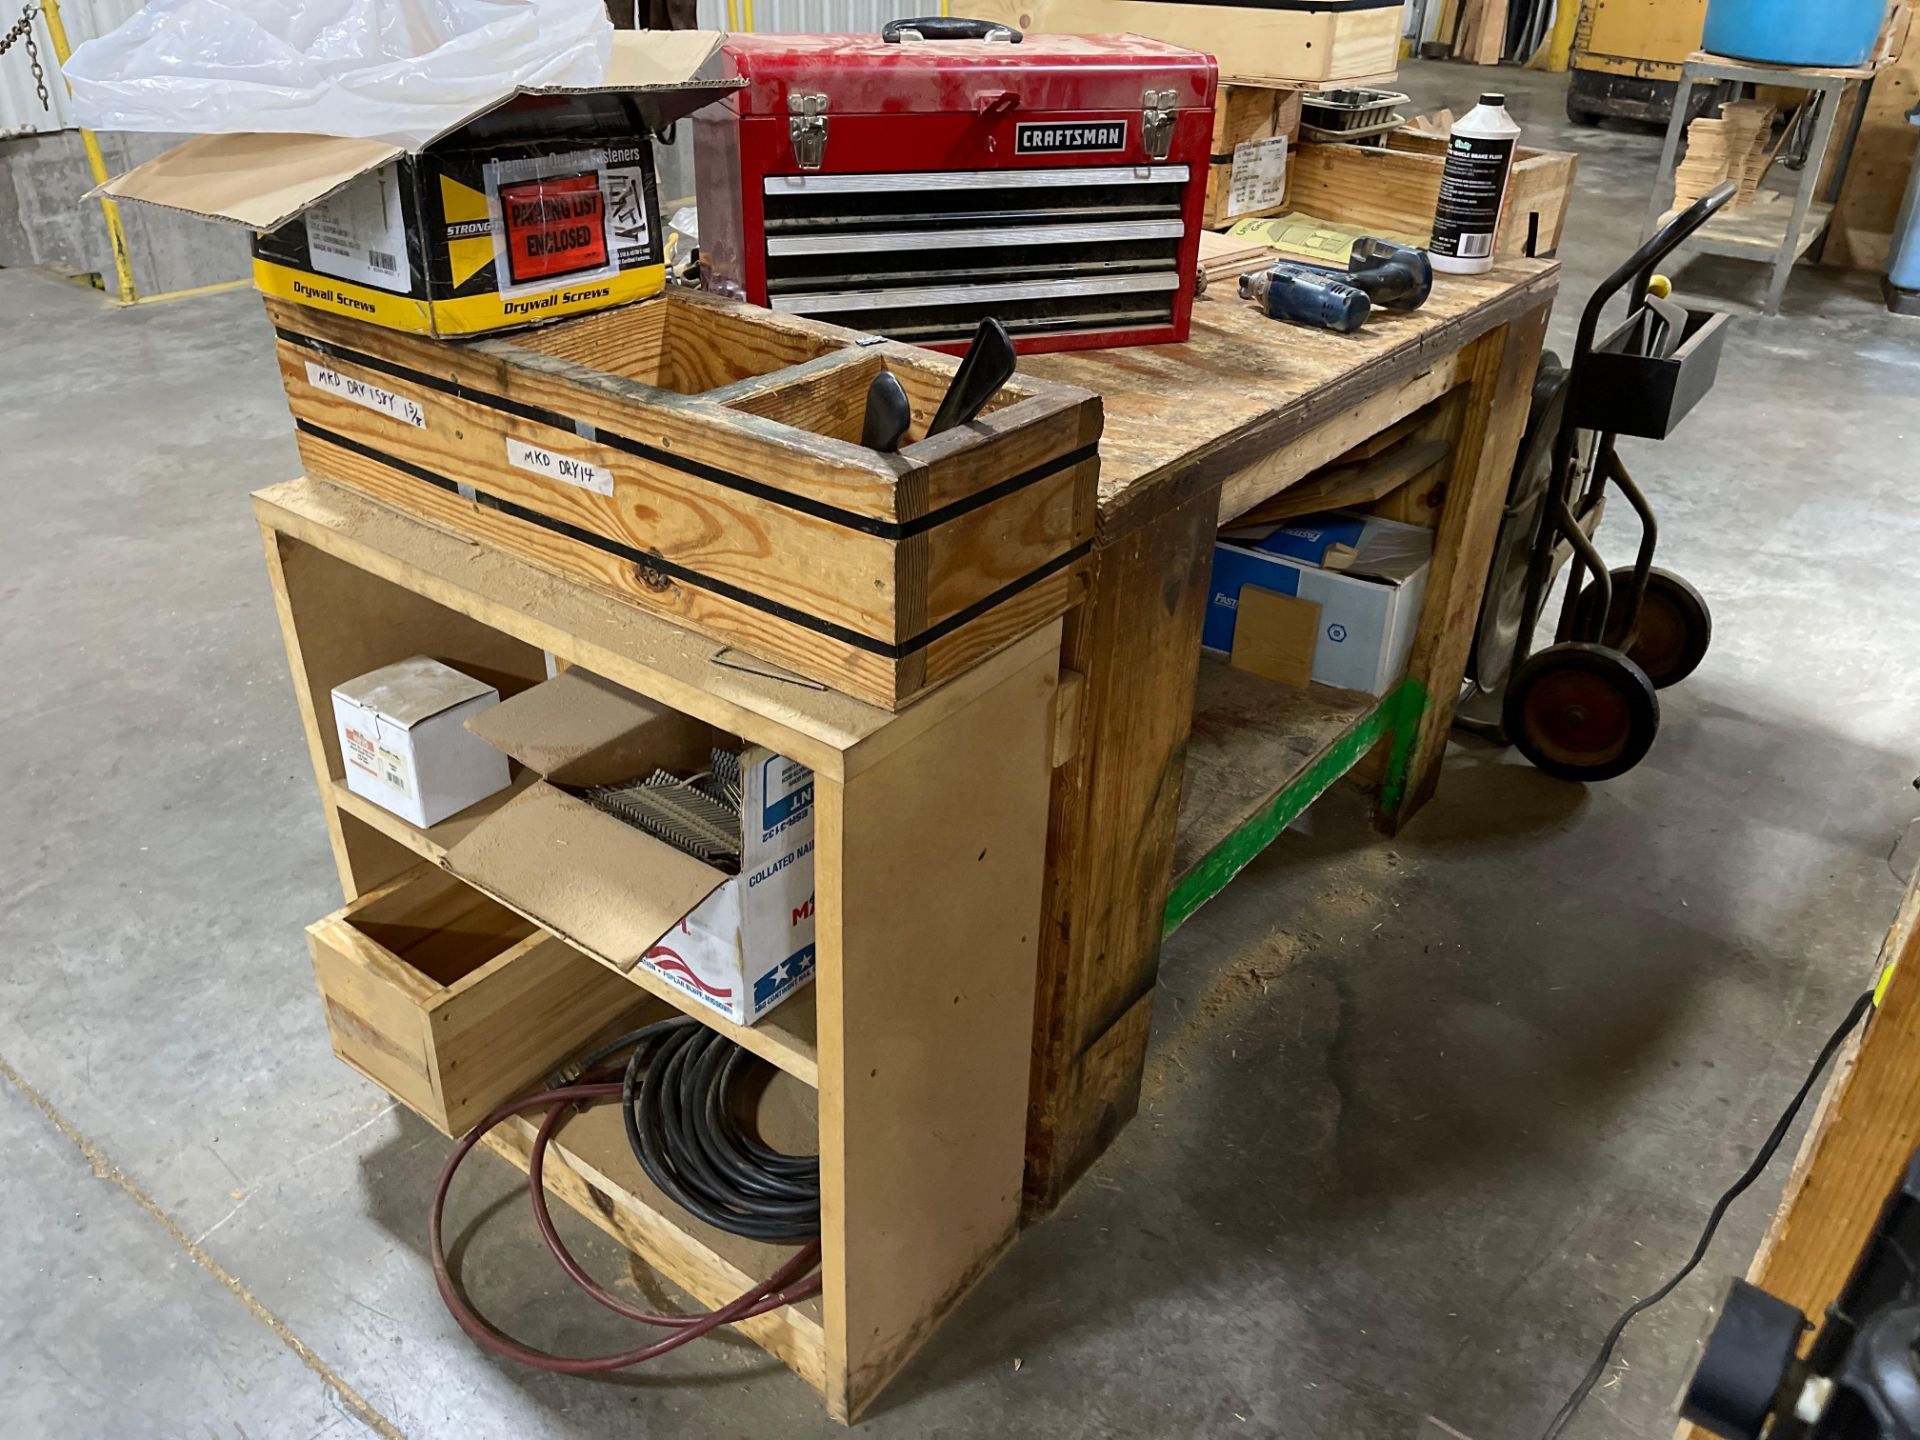 Wood Work Bench Strapping Station w/ Strapping Cart, Wood Crate and Contents - Image 3 of 6